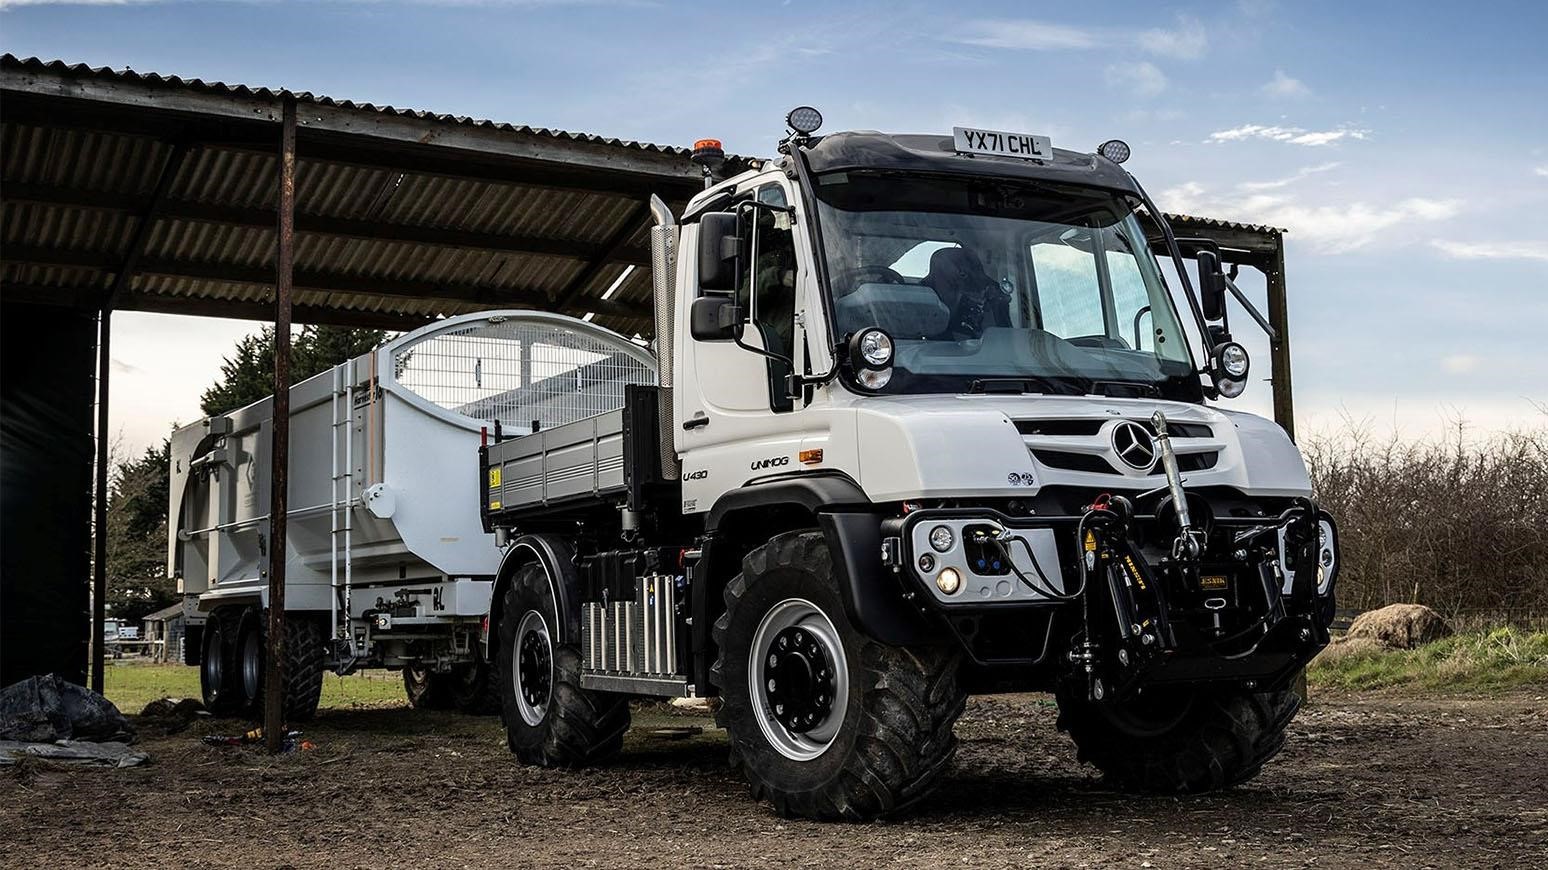 Mercedes-Benz Unimog U430 Tipper Is ‘Swiss Army Knife’ For Lincolnshire Pig Company